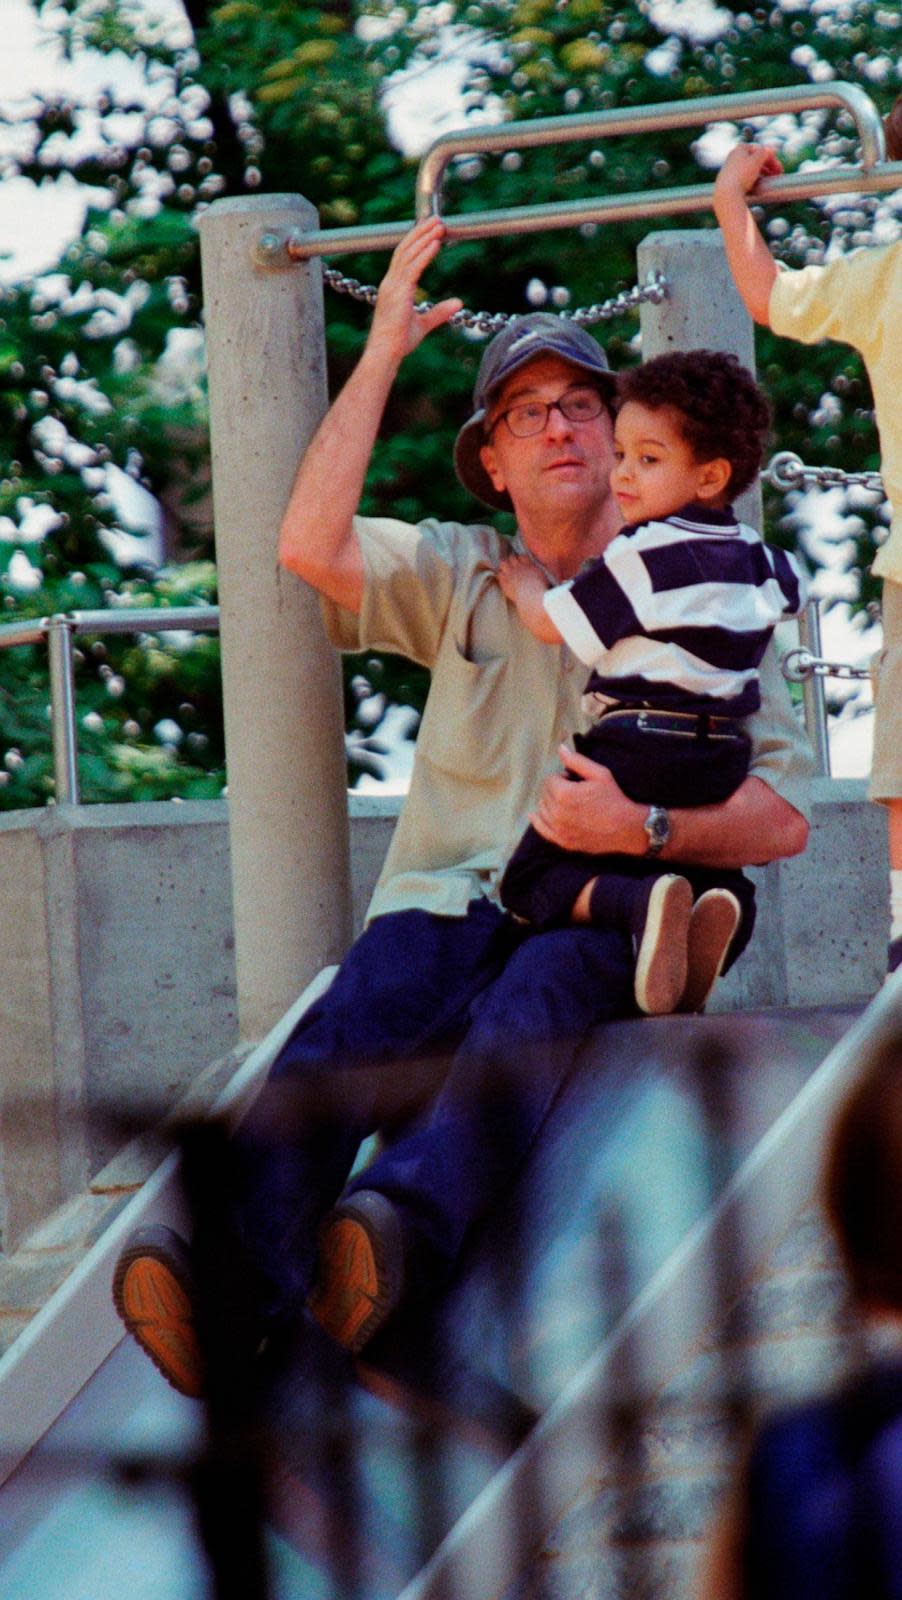 PHOTO: obert De Niro and son, Elliot, in Central Park, New York, May 11, 2001. (Lawrence Schwartzwald/Getty Images)